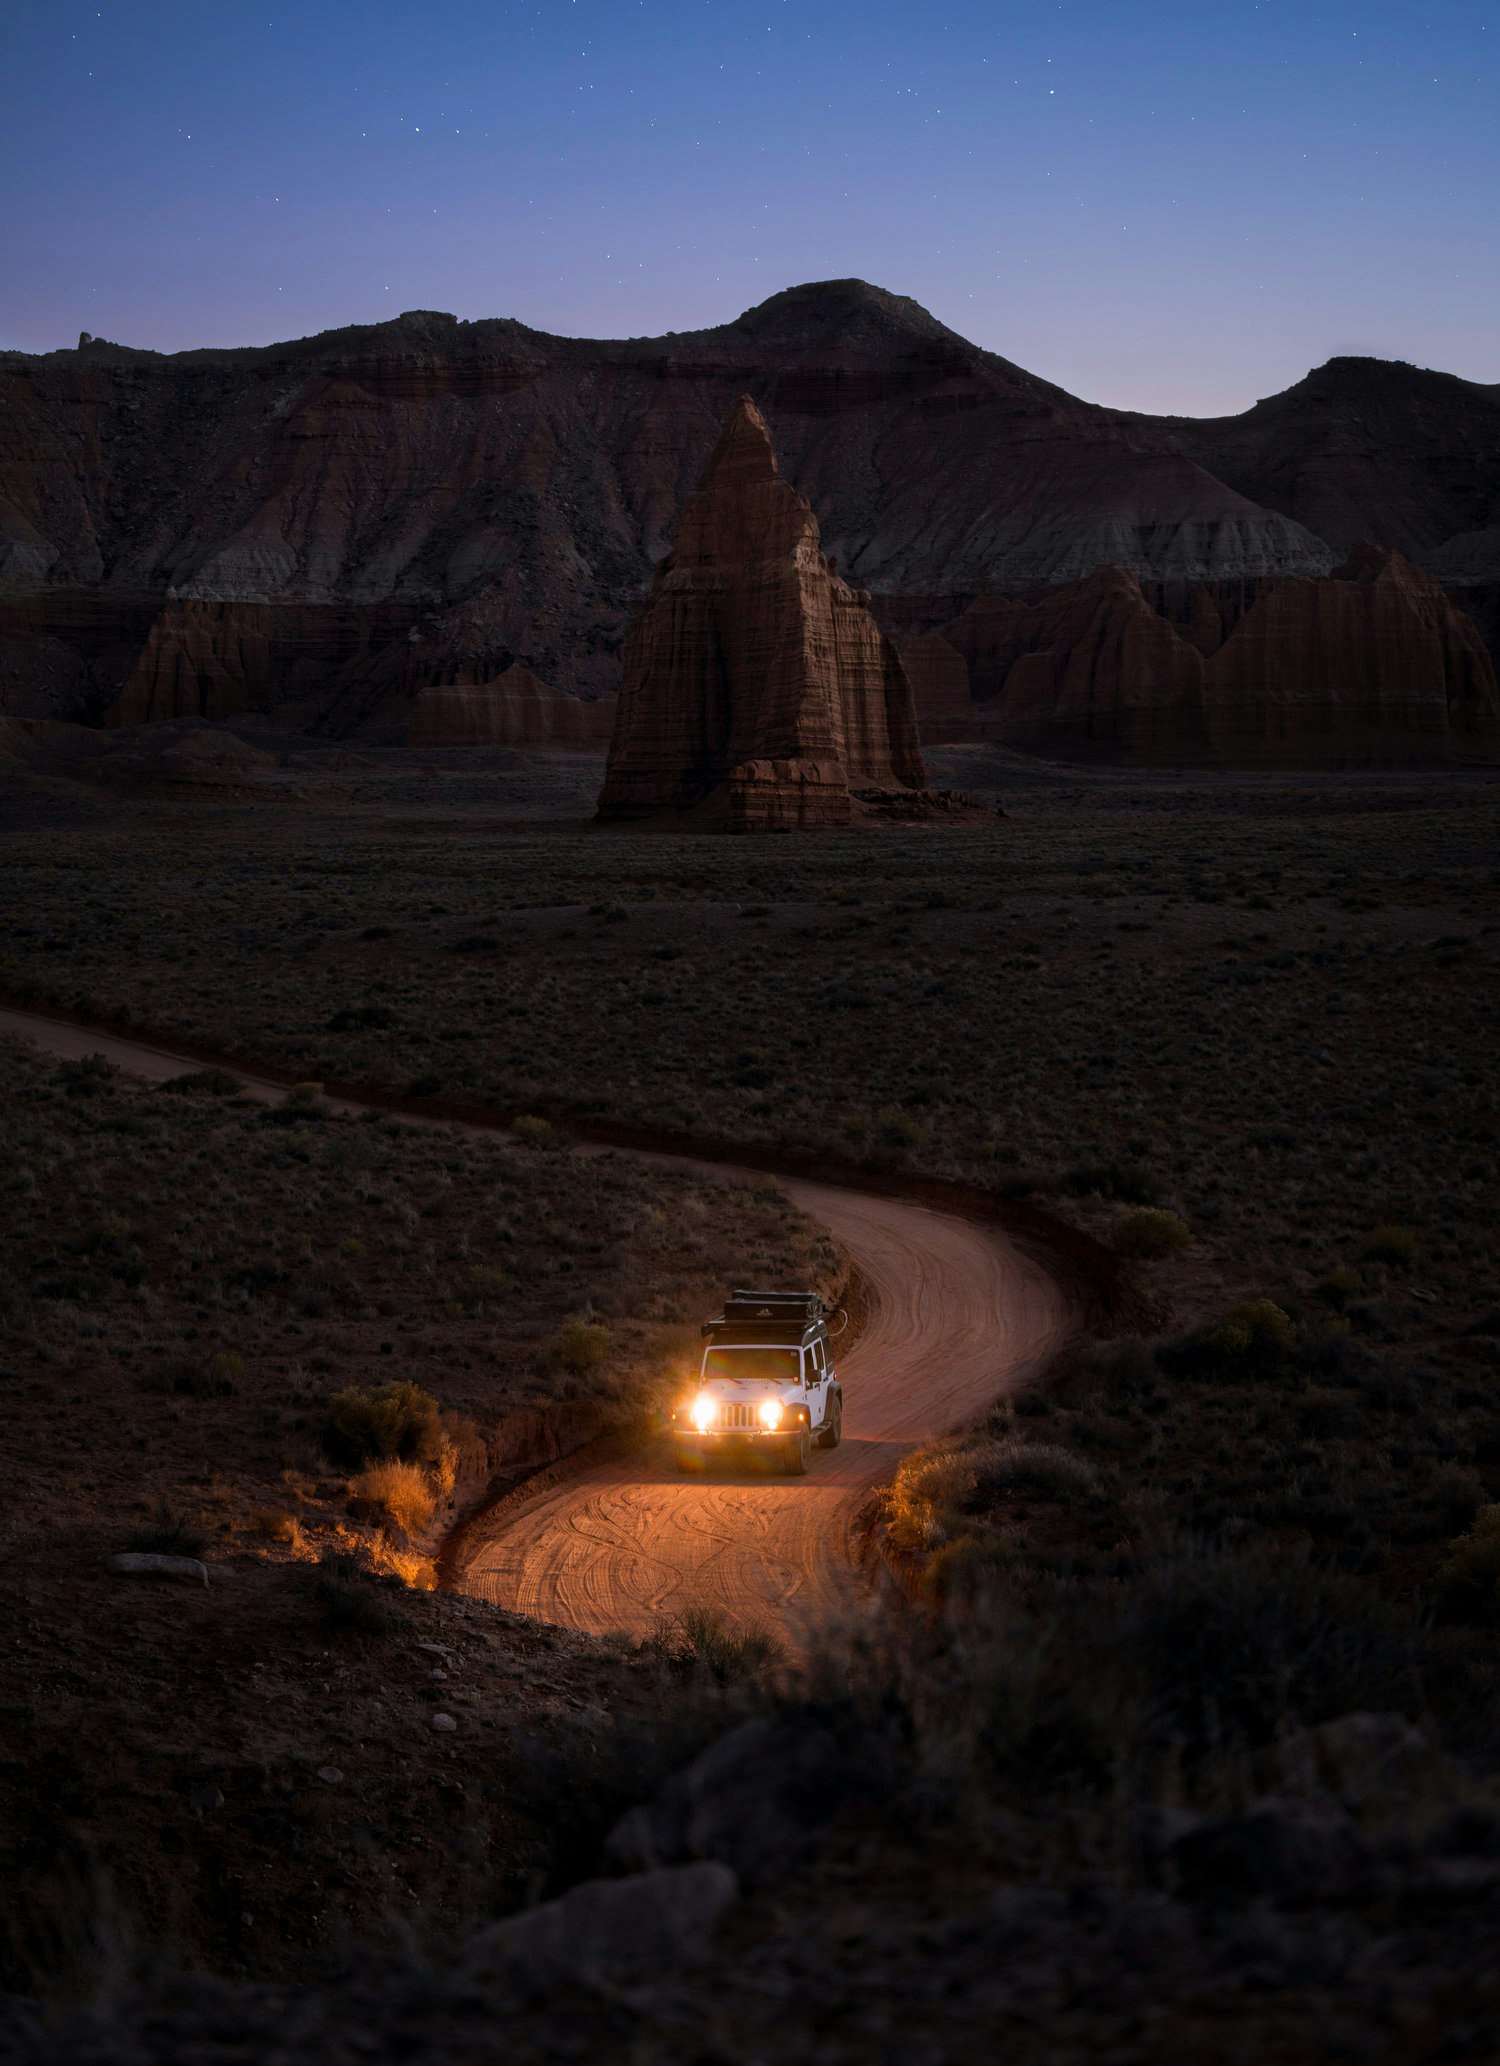 The Jeep driving through a beautiful desert in the USA